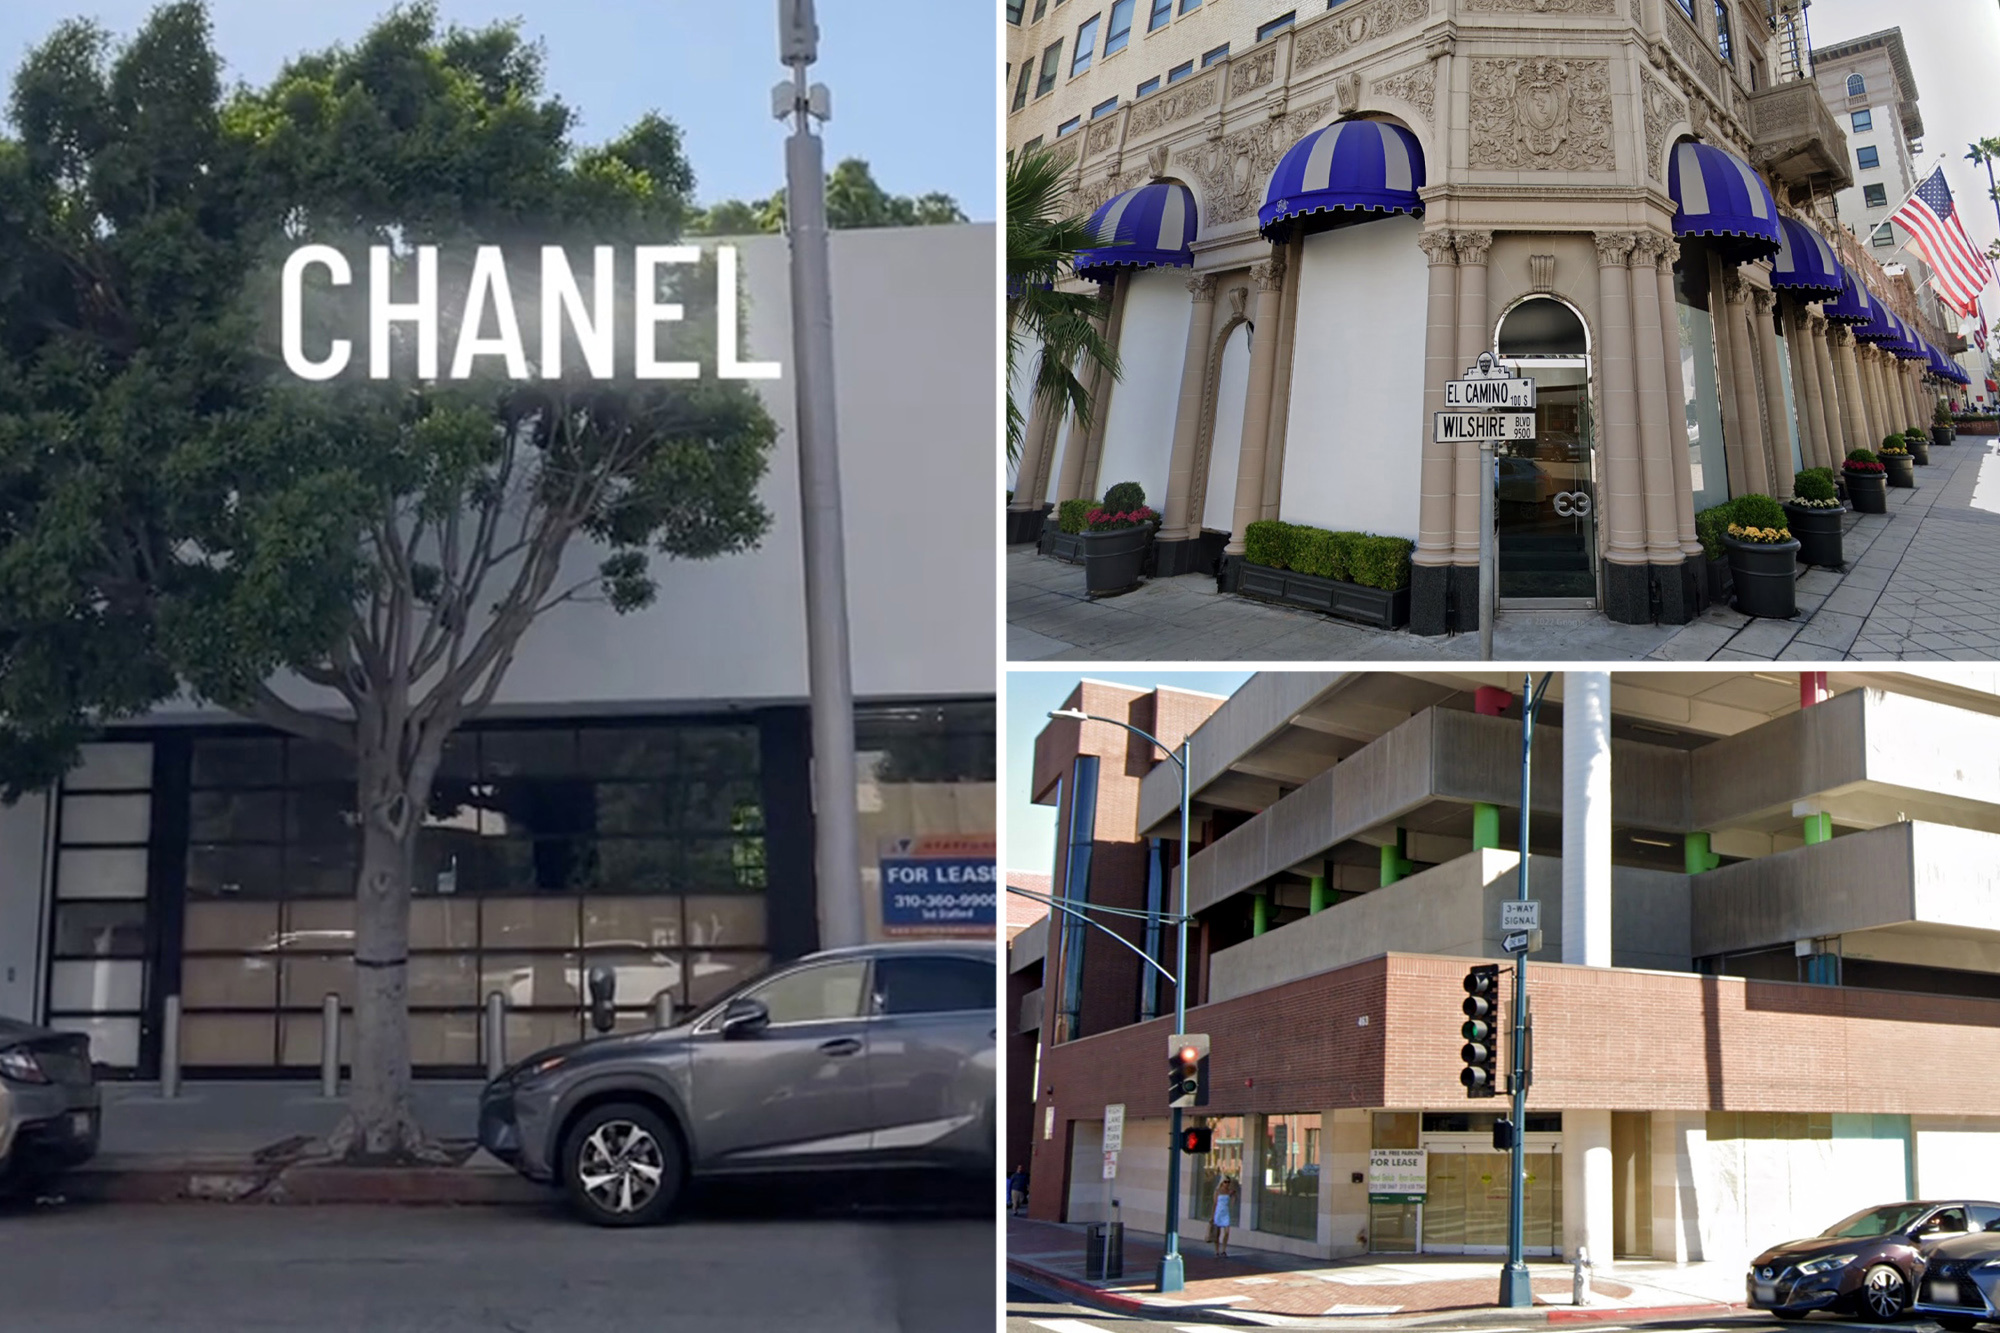 RIP Beverly Hills: Video shows high-end retail stores now shuttered ...